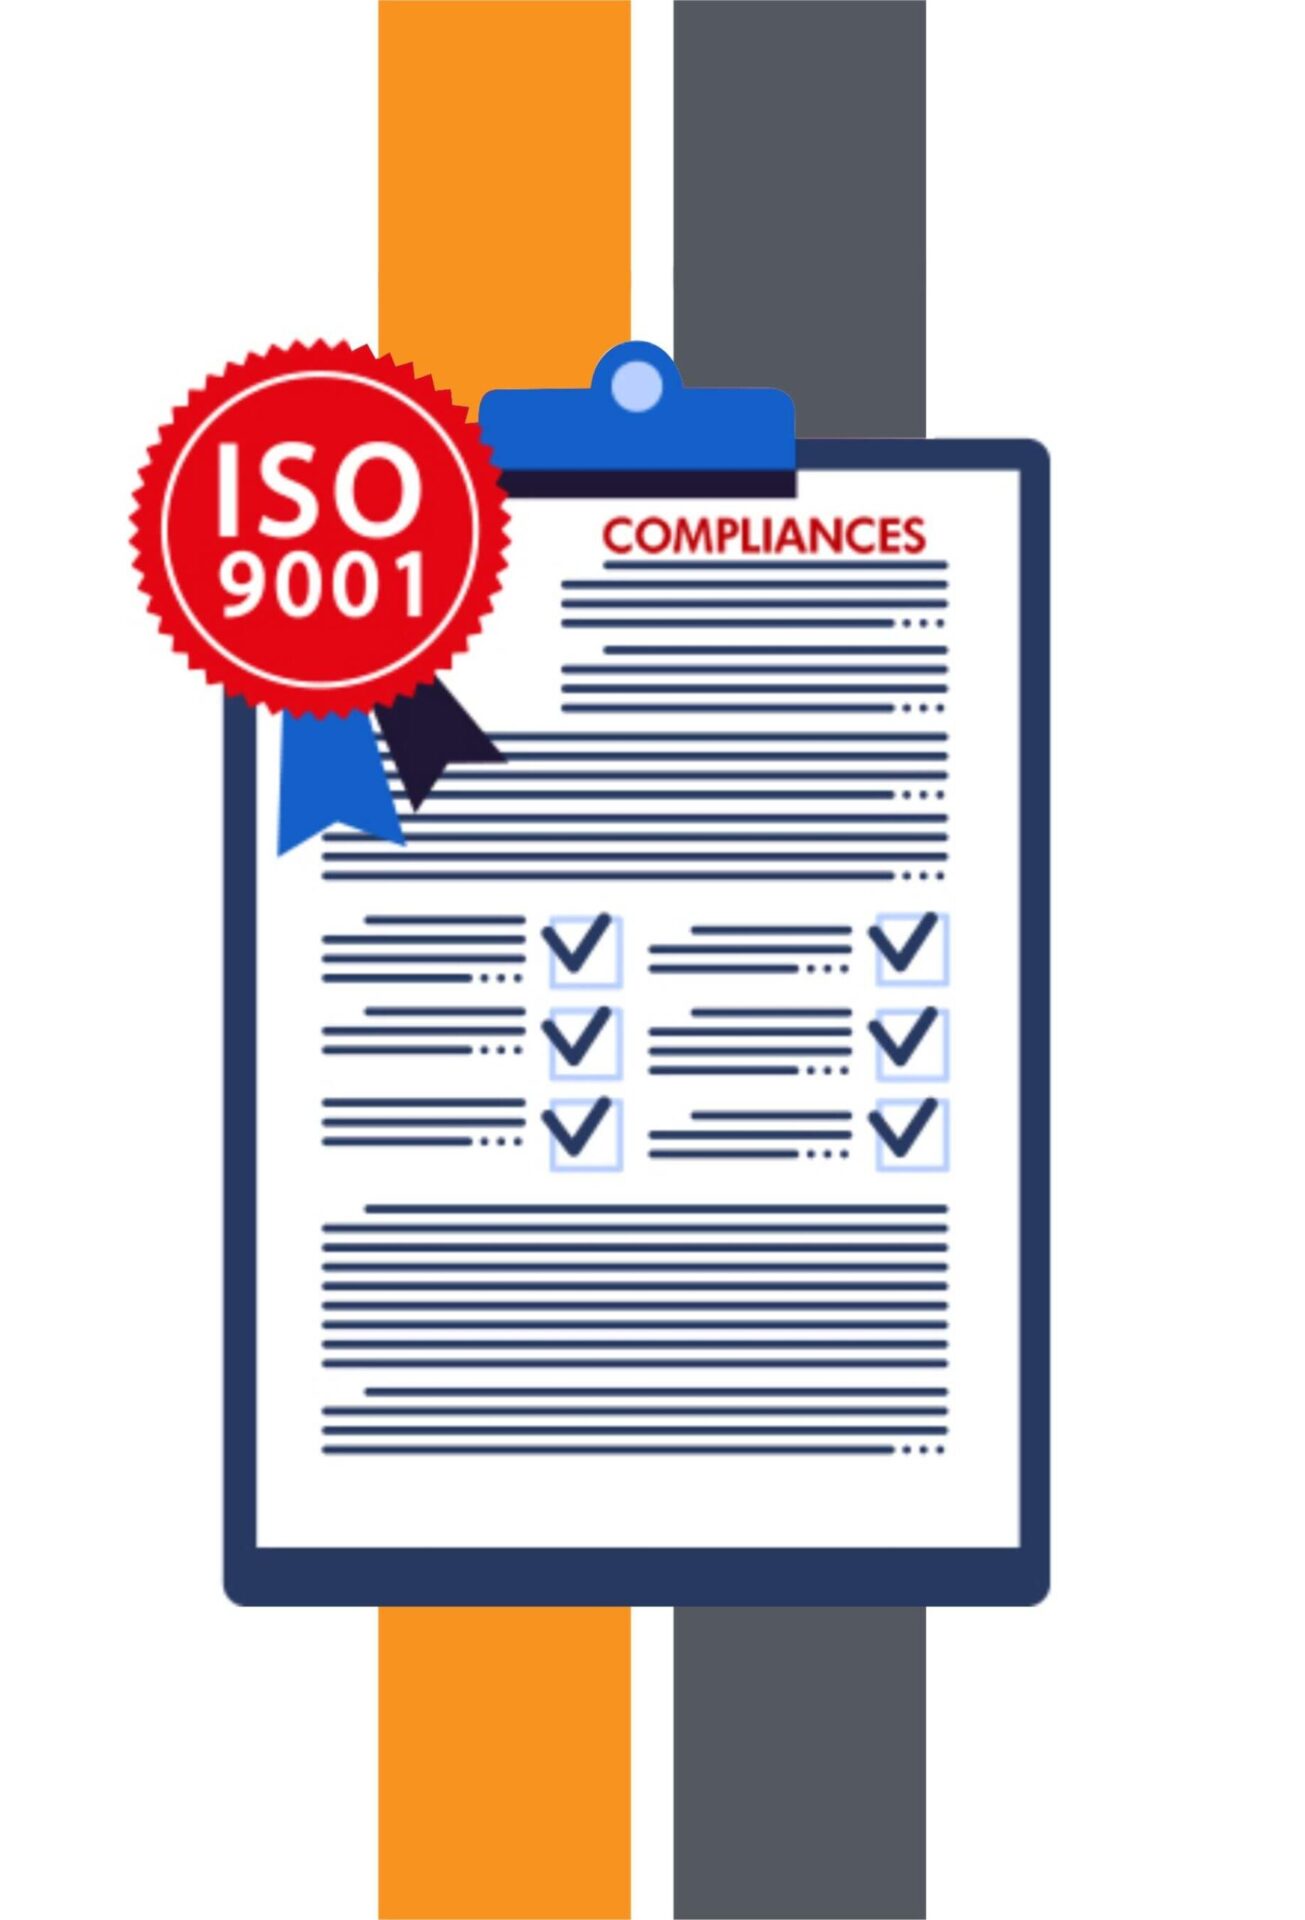 compliance and certifications